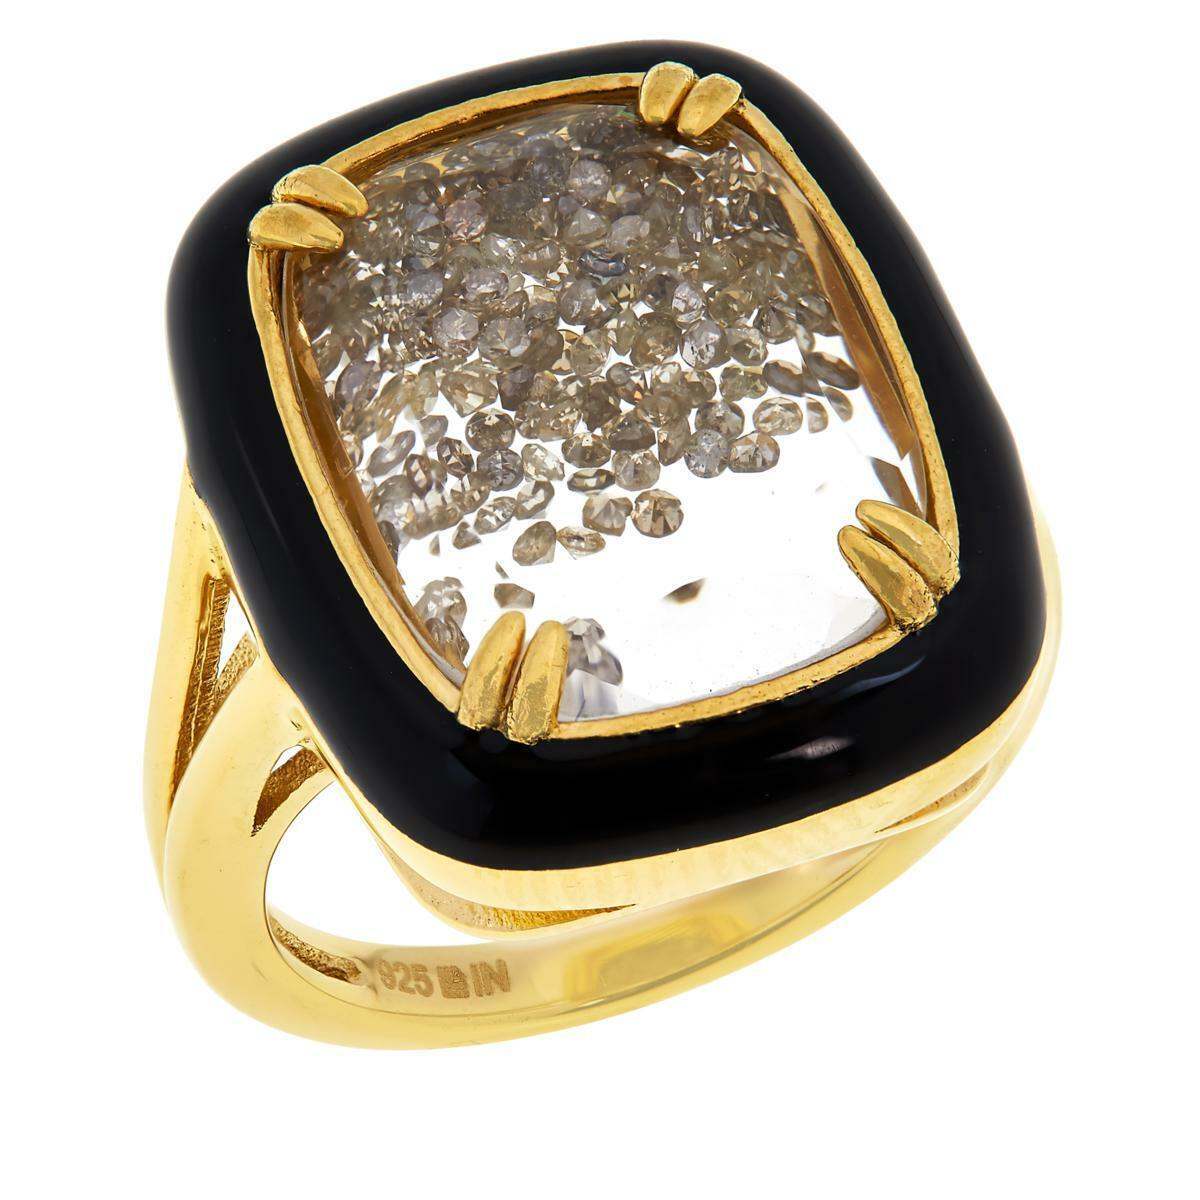 Colleen Lopez Gold-Plated Colored Diamond Shaker Ring, Size 6